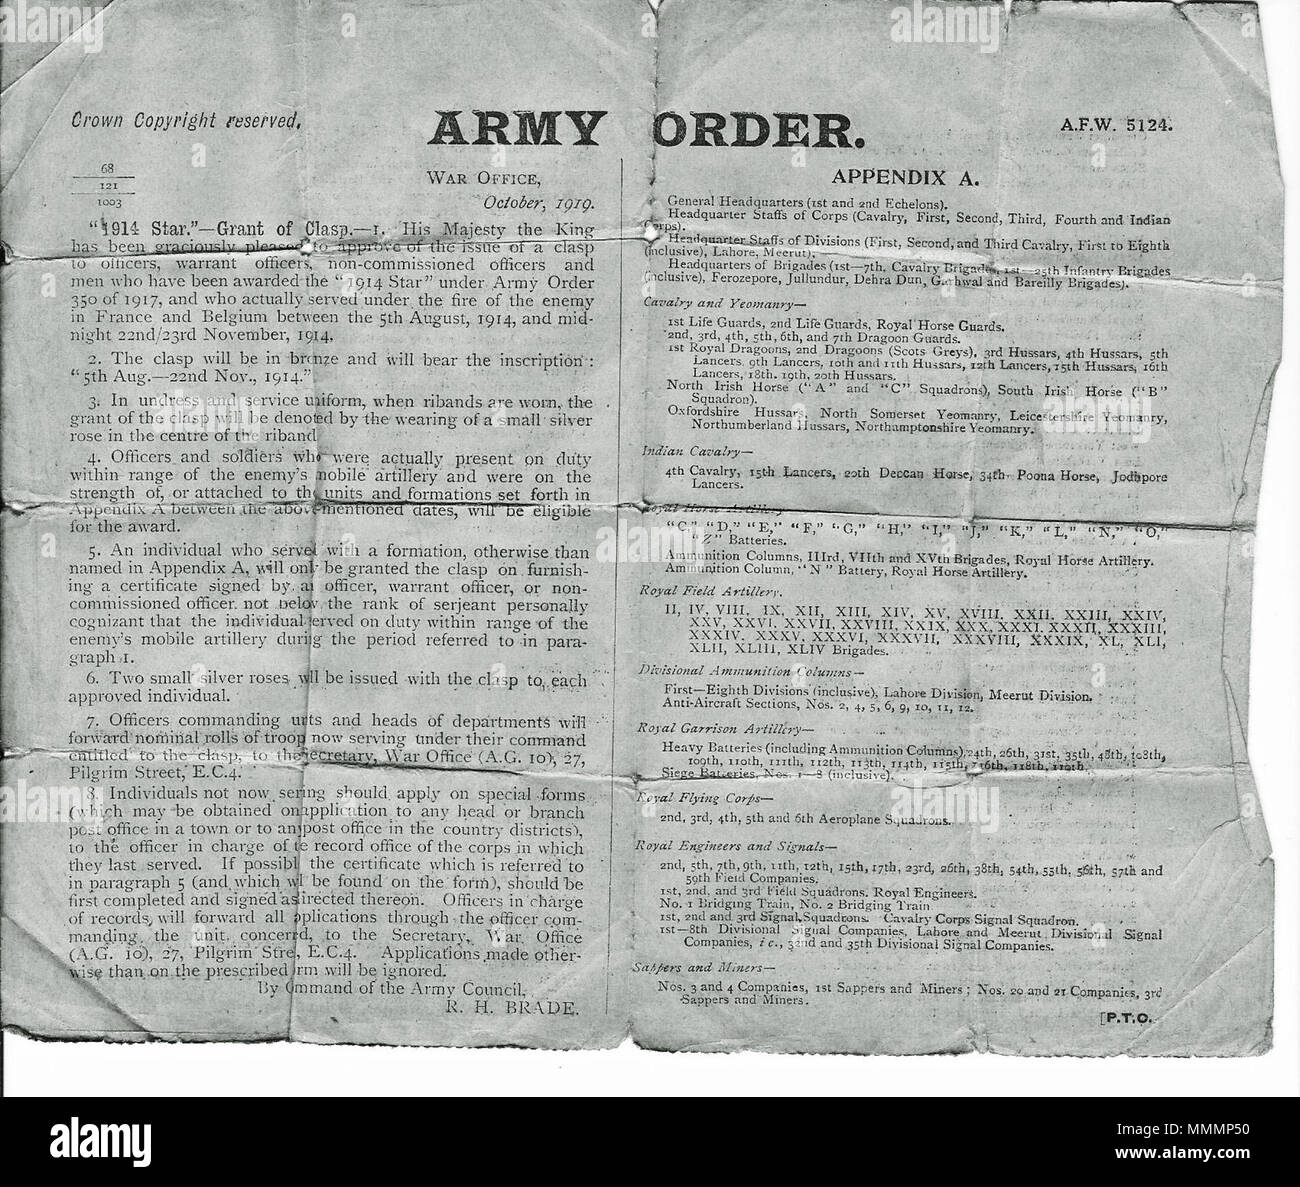 . This Army Order was issued in October 1919 and outlined the criteria for the addition of the 'clasp' to the 1914-1915 Star which was awarded in 1917. Basically it listed the men and units who could wear the clasp, these were members of the BEF who went to France in 1914 and were under fire between 5th August and 22nd November 1914. The men who wore the clasp were the 'Old Contemptibles', the name given to the BEF by the Kaiser when he called it 'A Contemptible little Army'. As the Kaiser was a Field Marshall in the British Army at the time, that was quite rude. See link for the other side of Stock Photo